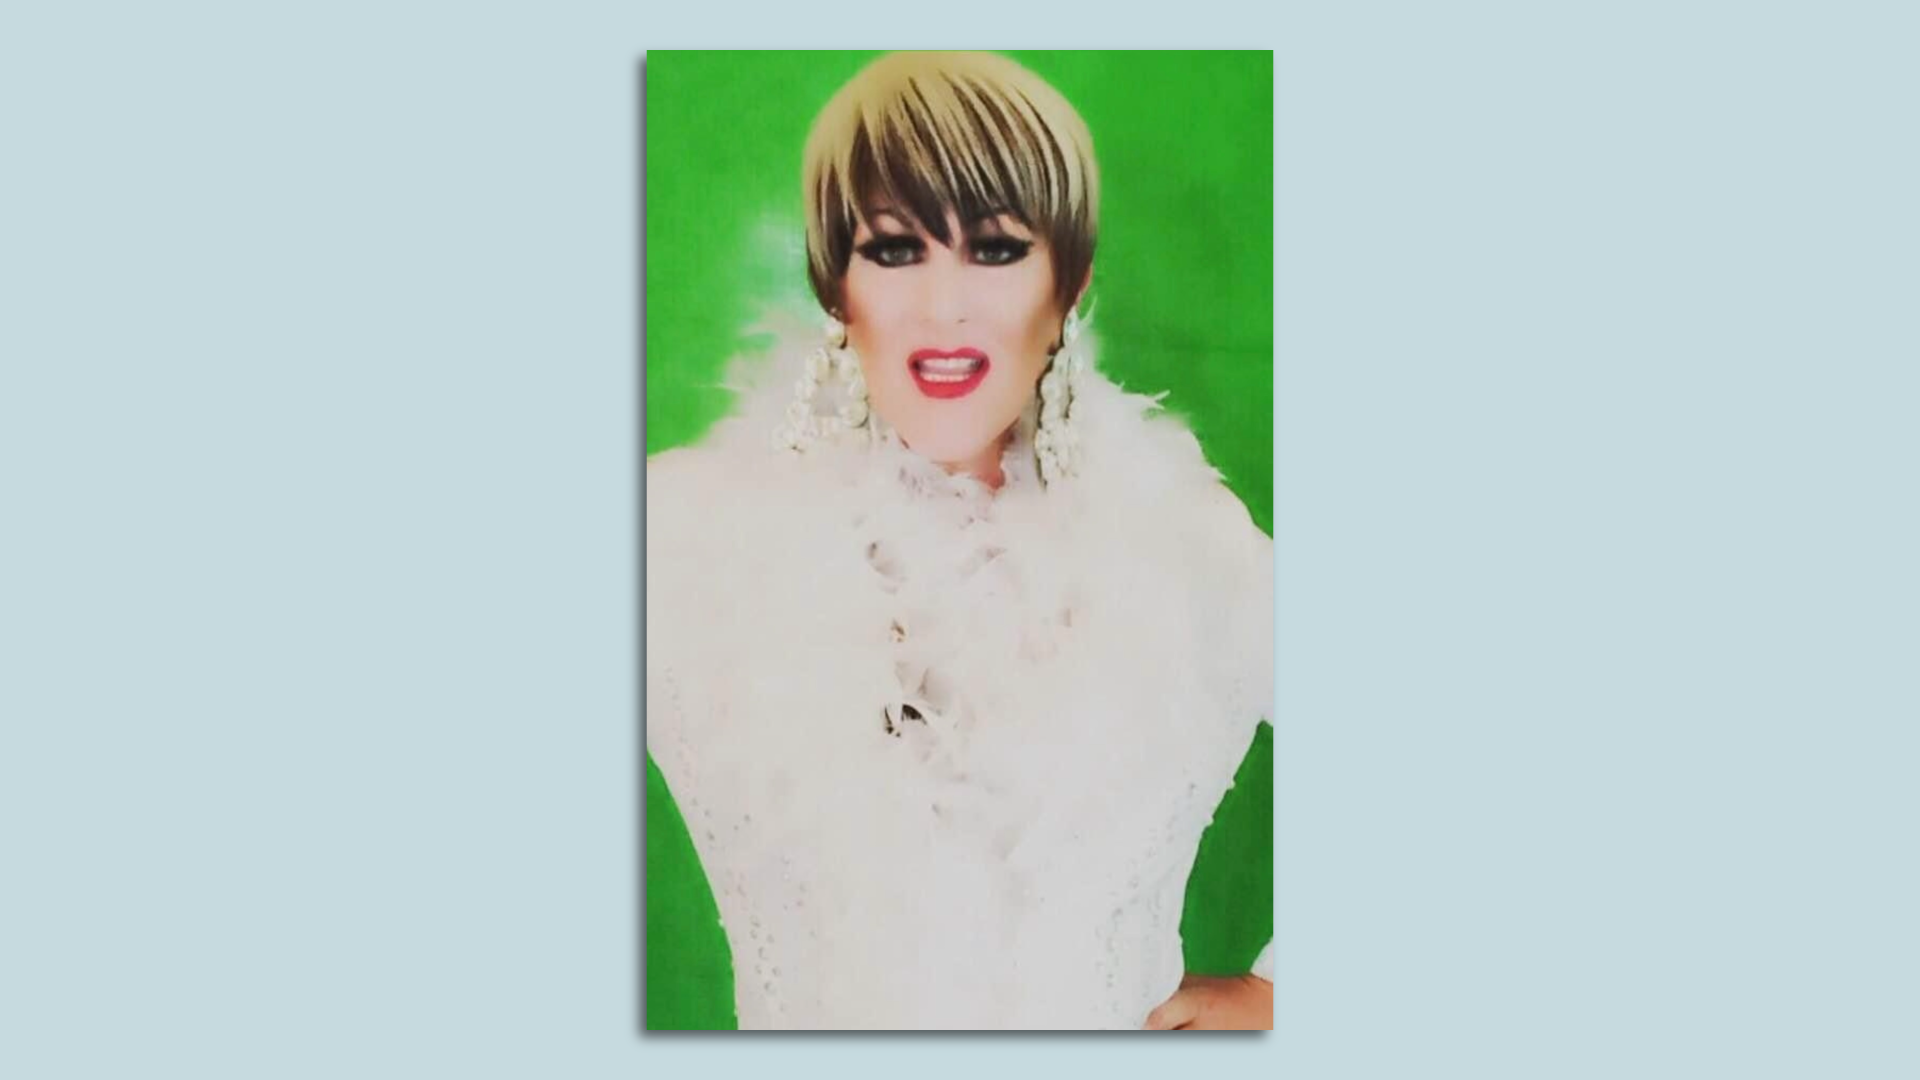 Sarasota drag performer Lindsay Calrton-Cline poses in a white feathered top in front of a bright green background.